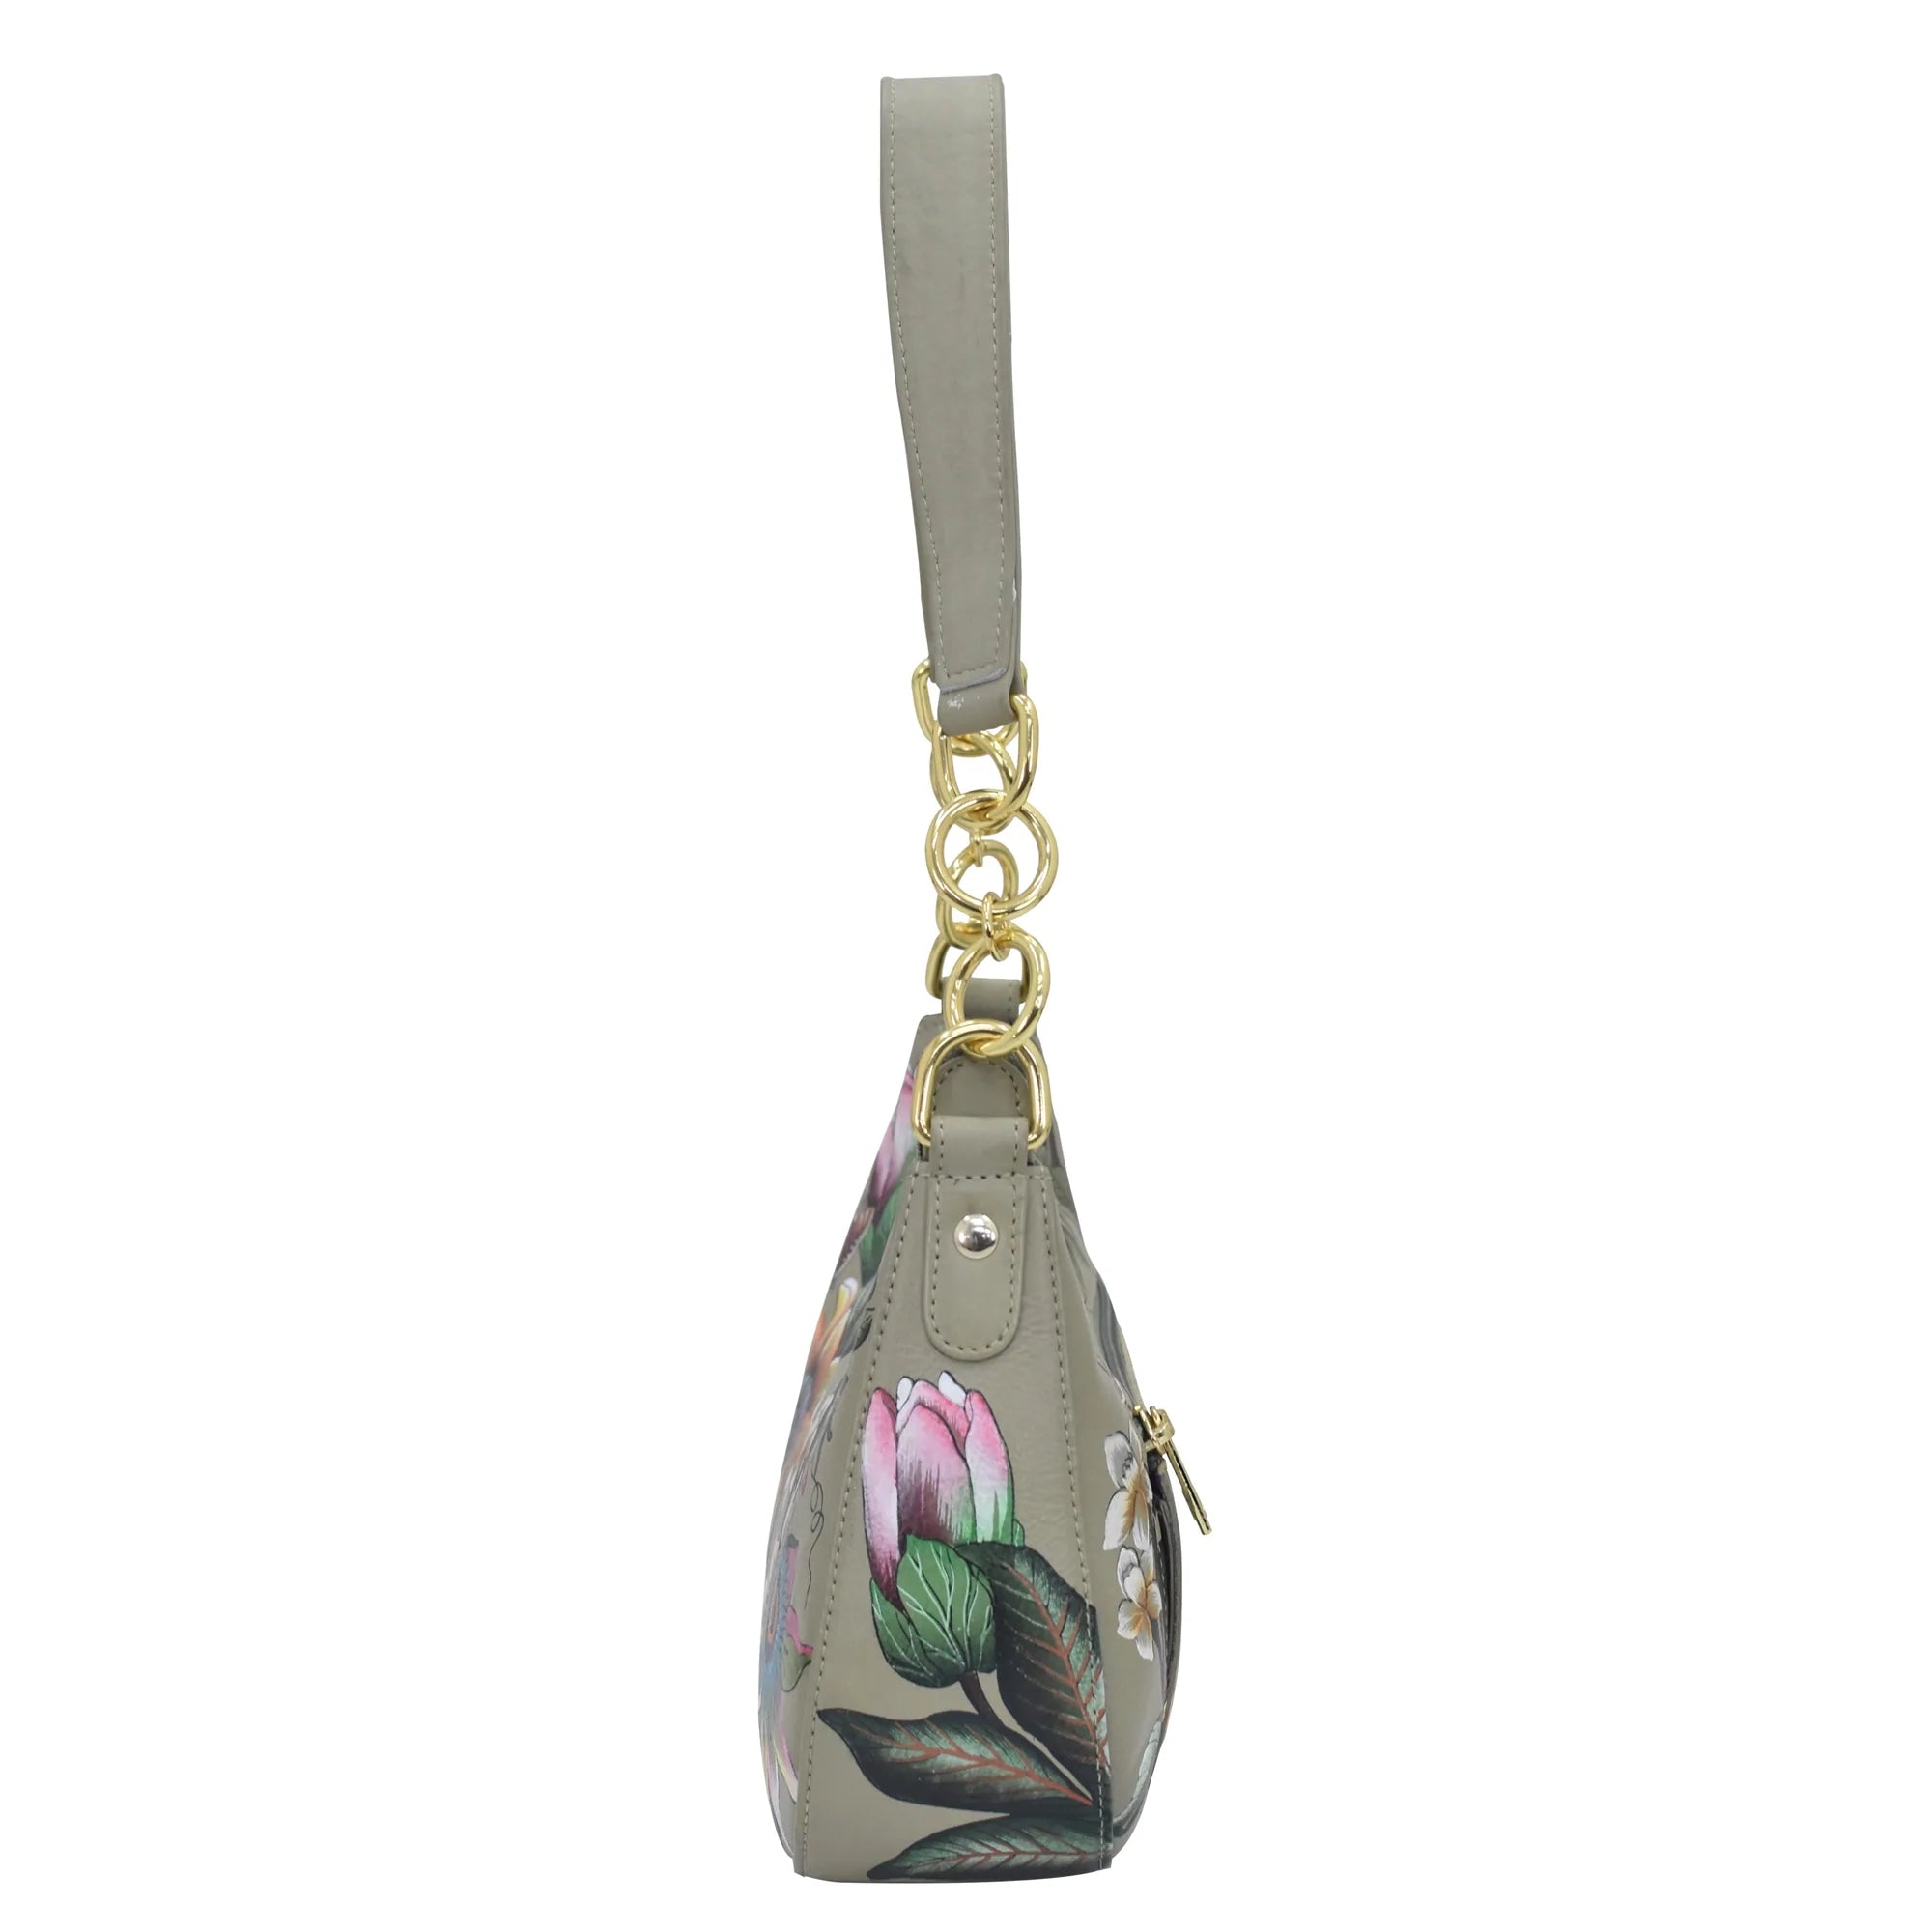 Anuschka Floral Passion Small Convertible Hobo